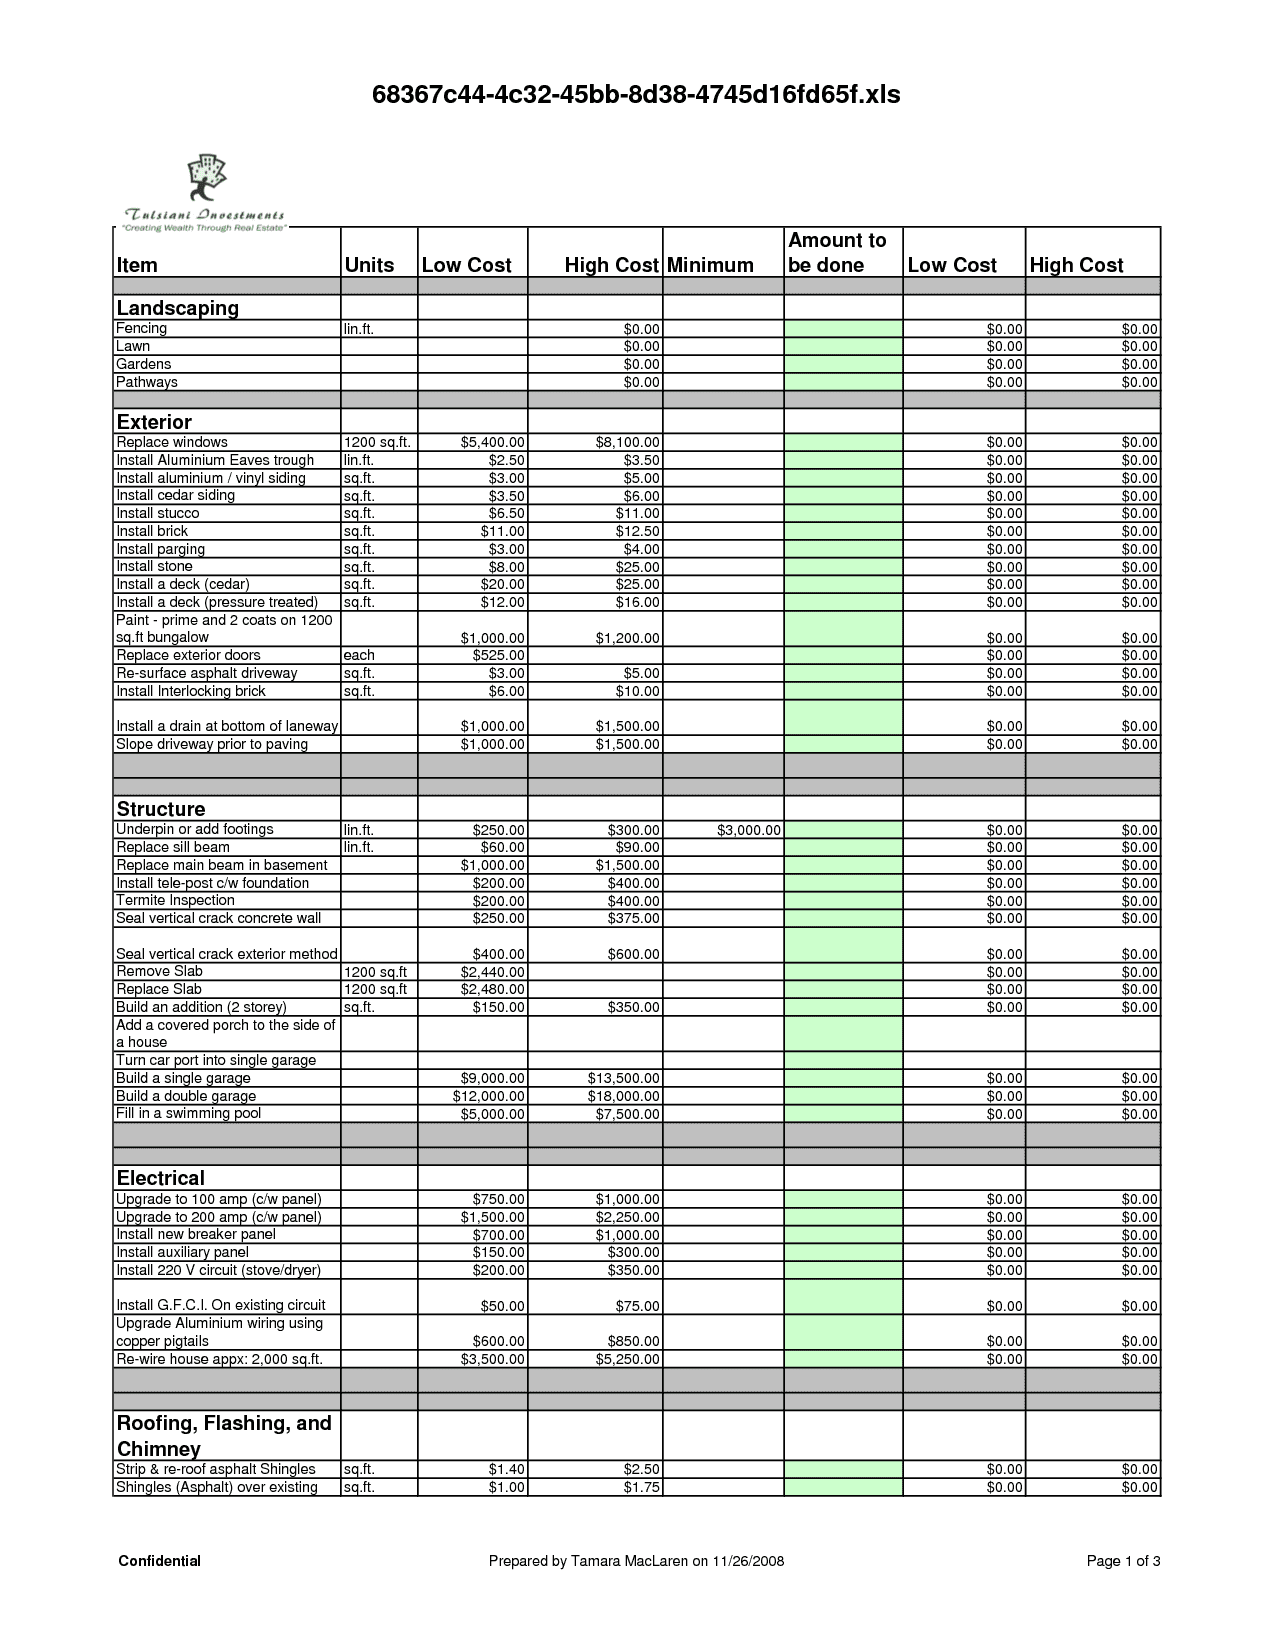 Building Estimation And Costing Xls And Kitchen Remodel Budget Worksheet